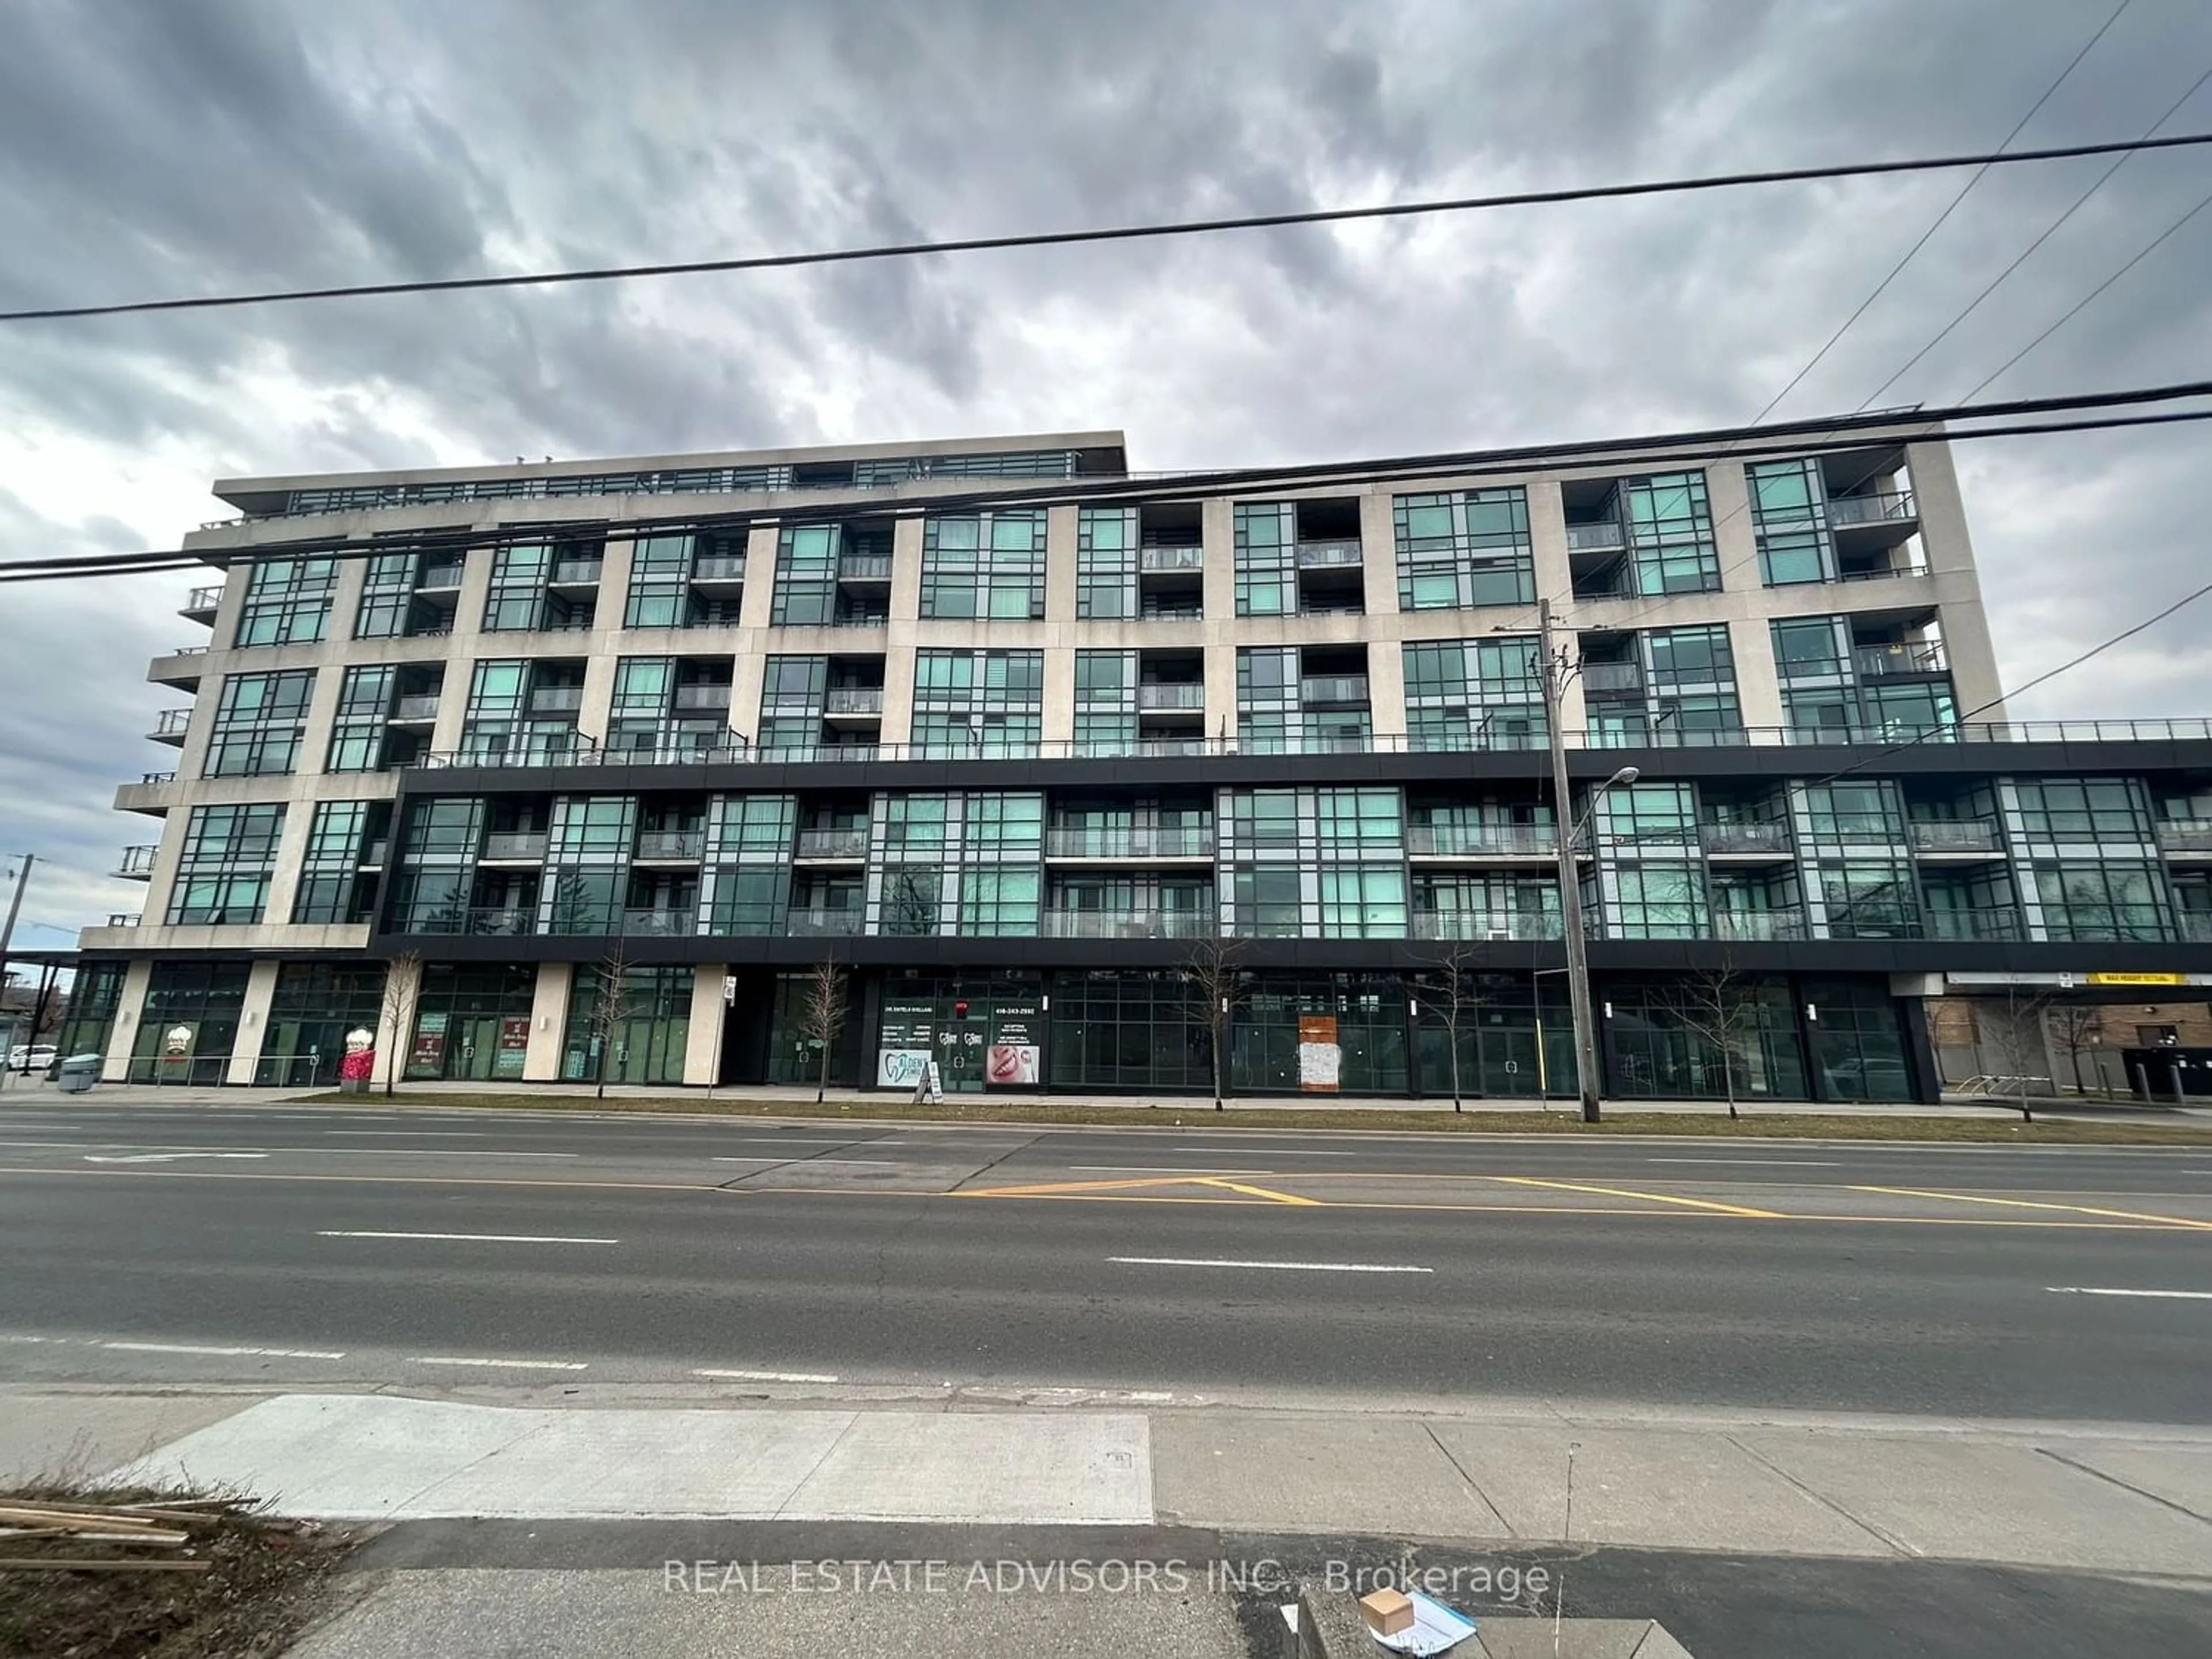 A pic from exterior of the house or condo for 2522 Keele St #203, Toronto Ontario M6L 2N8